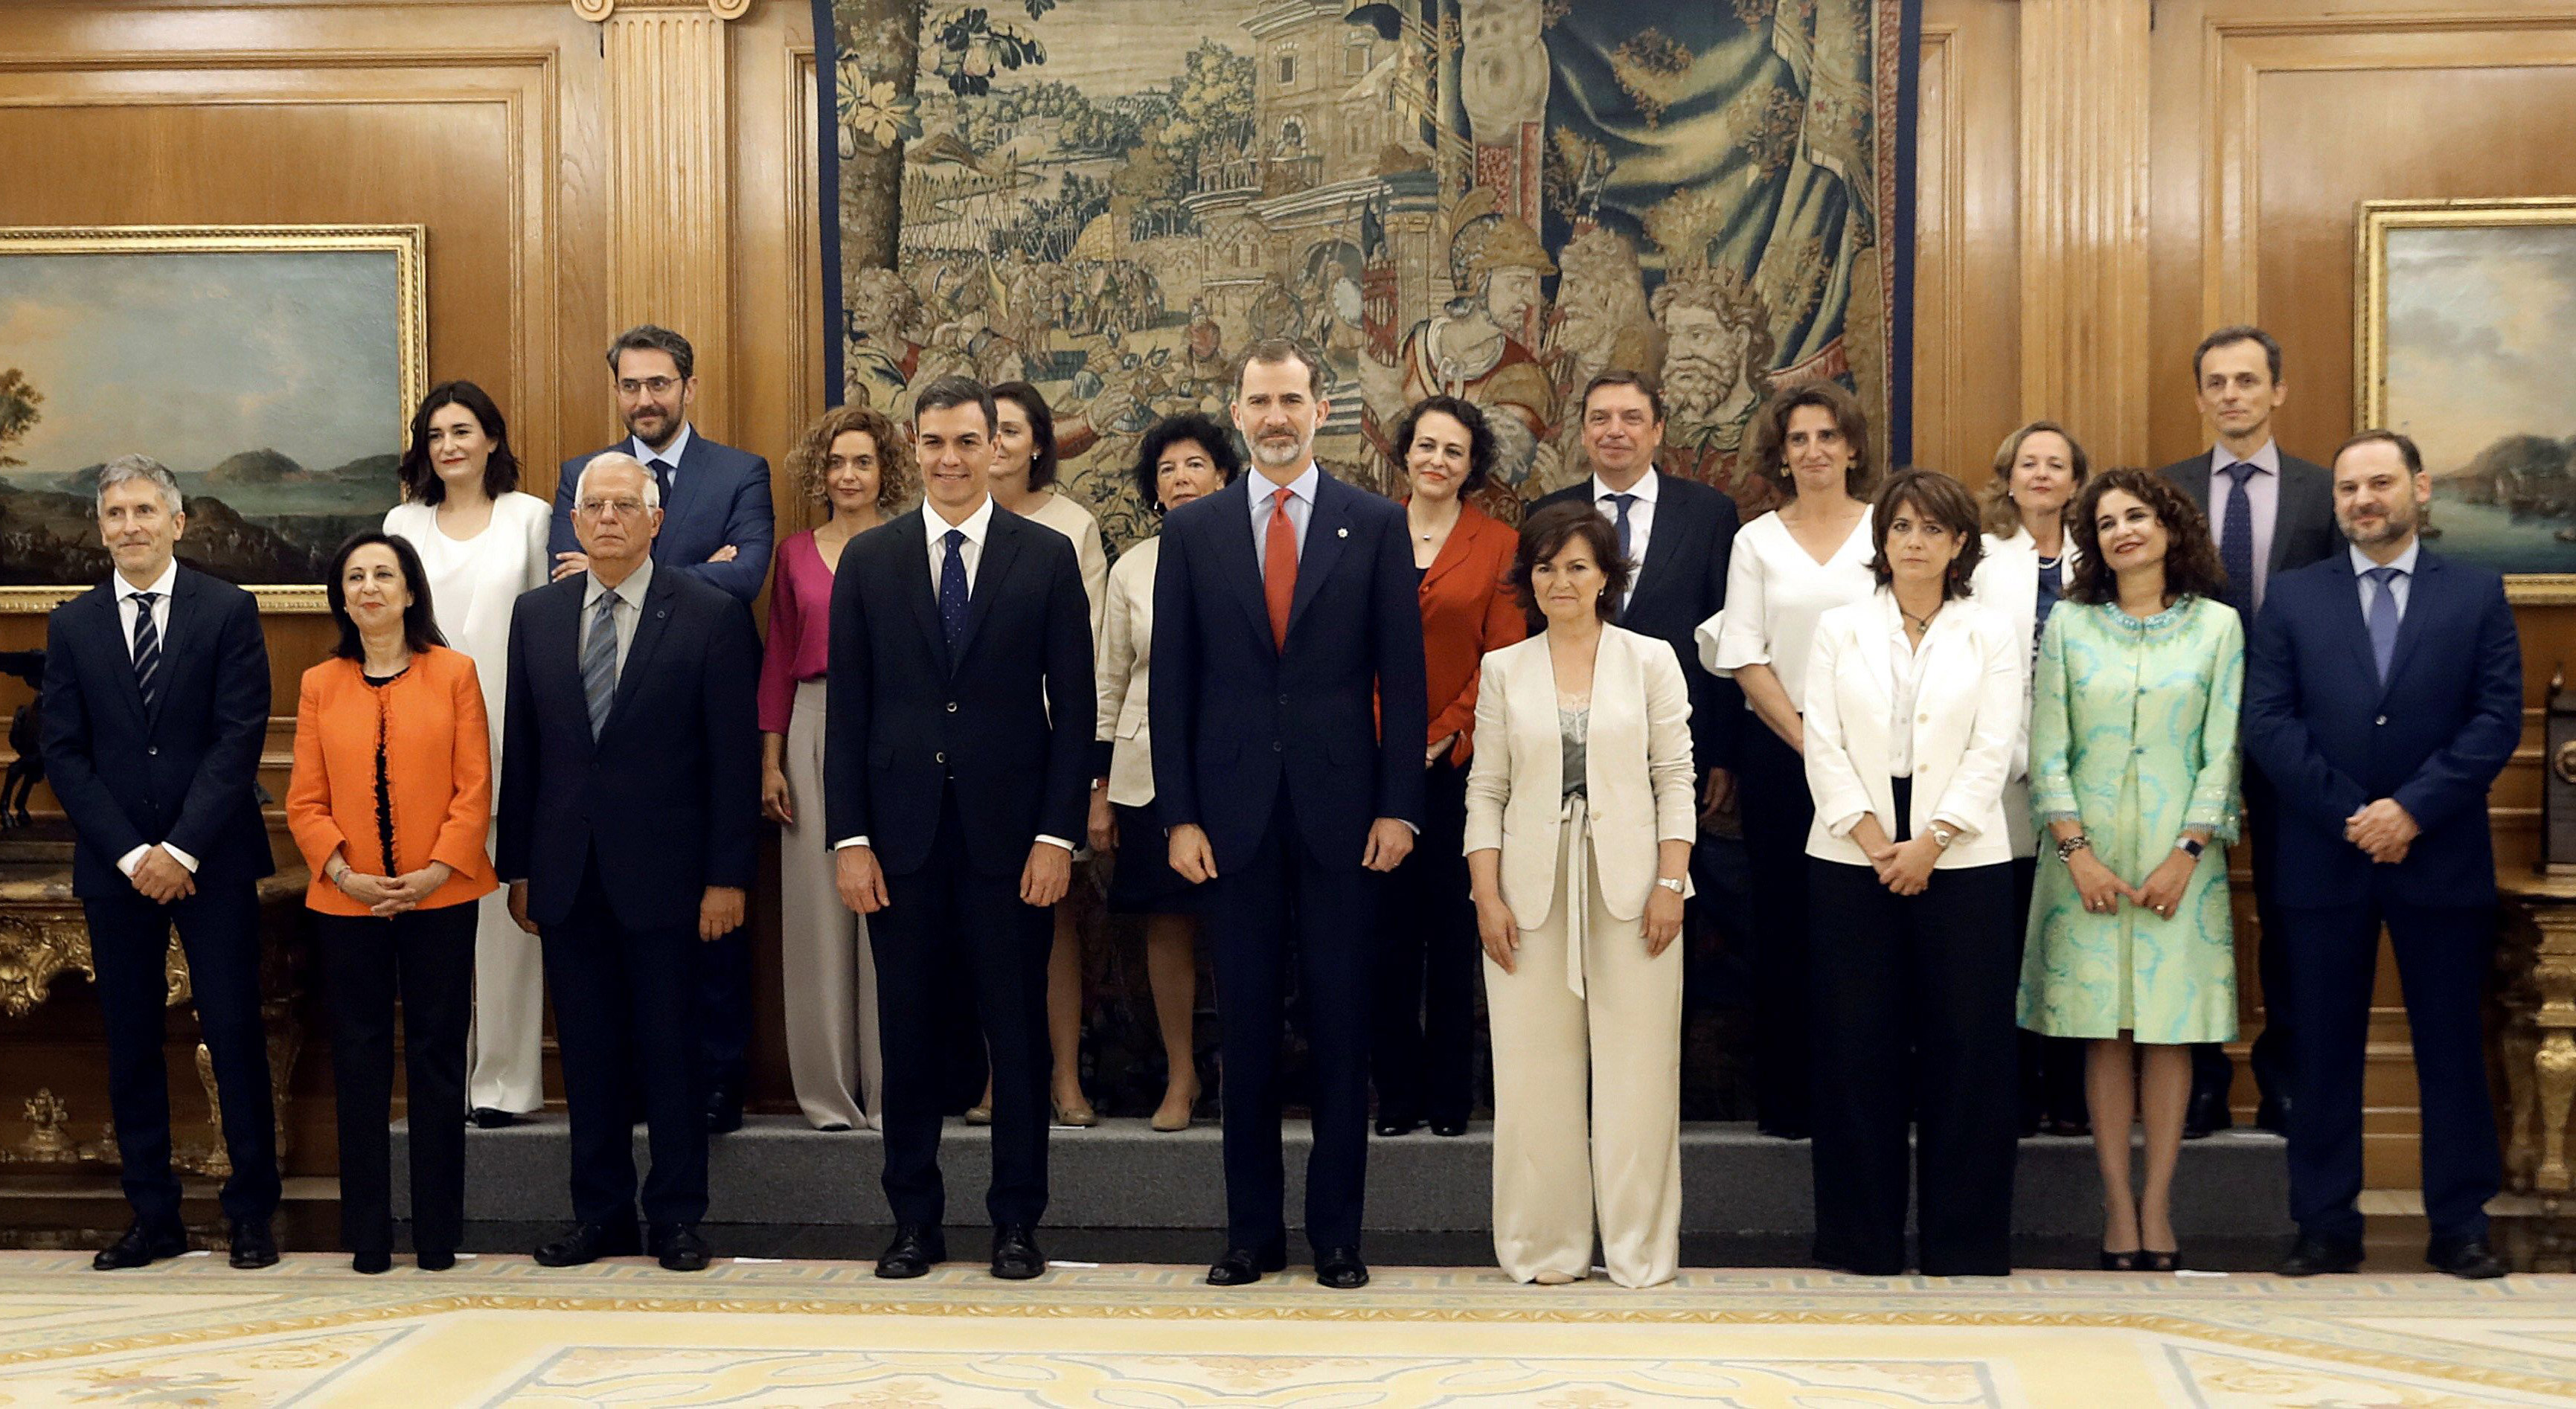 The new Spanish government's ministers pose with Spanish Prime Minister Pedro Sanchez (7L) and King Felipe VI (C) after taking oath of office at La Zarzuela palace in Madrid on June 7, 2018. (JAVIER LIZON—AFP/Getty Images)